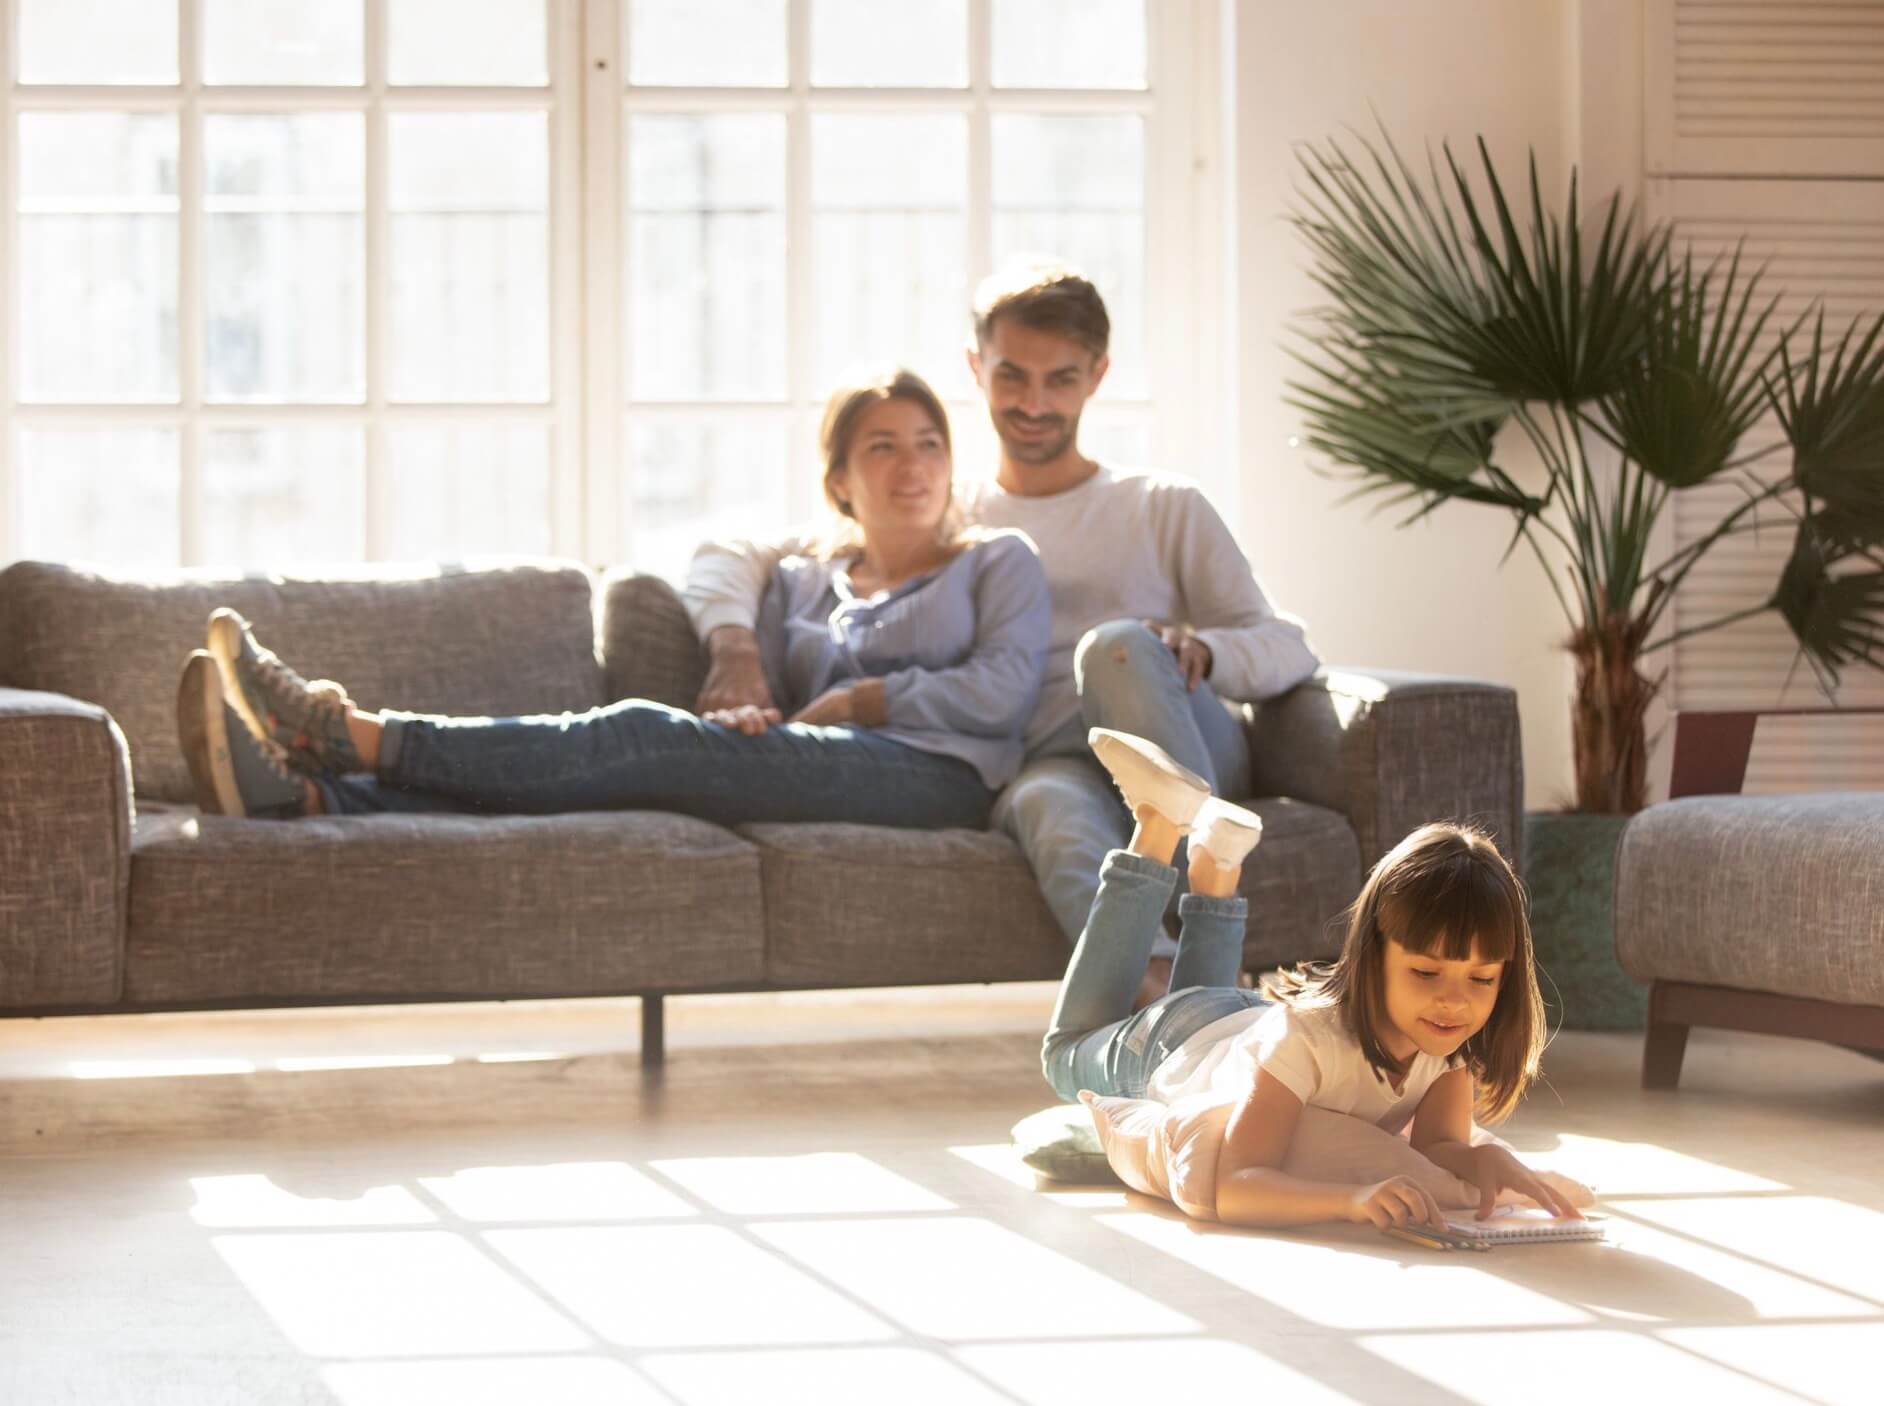 A family relaxing in a sun-drenched living room. The child lays on the floor reading a book while the parents watch happily from the couch.